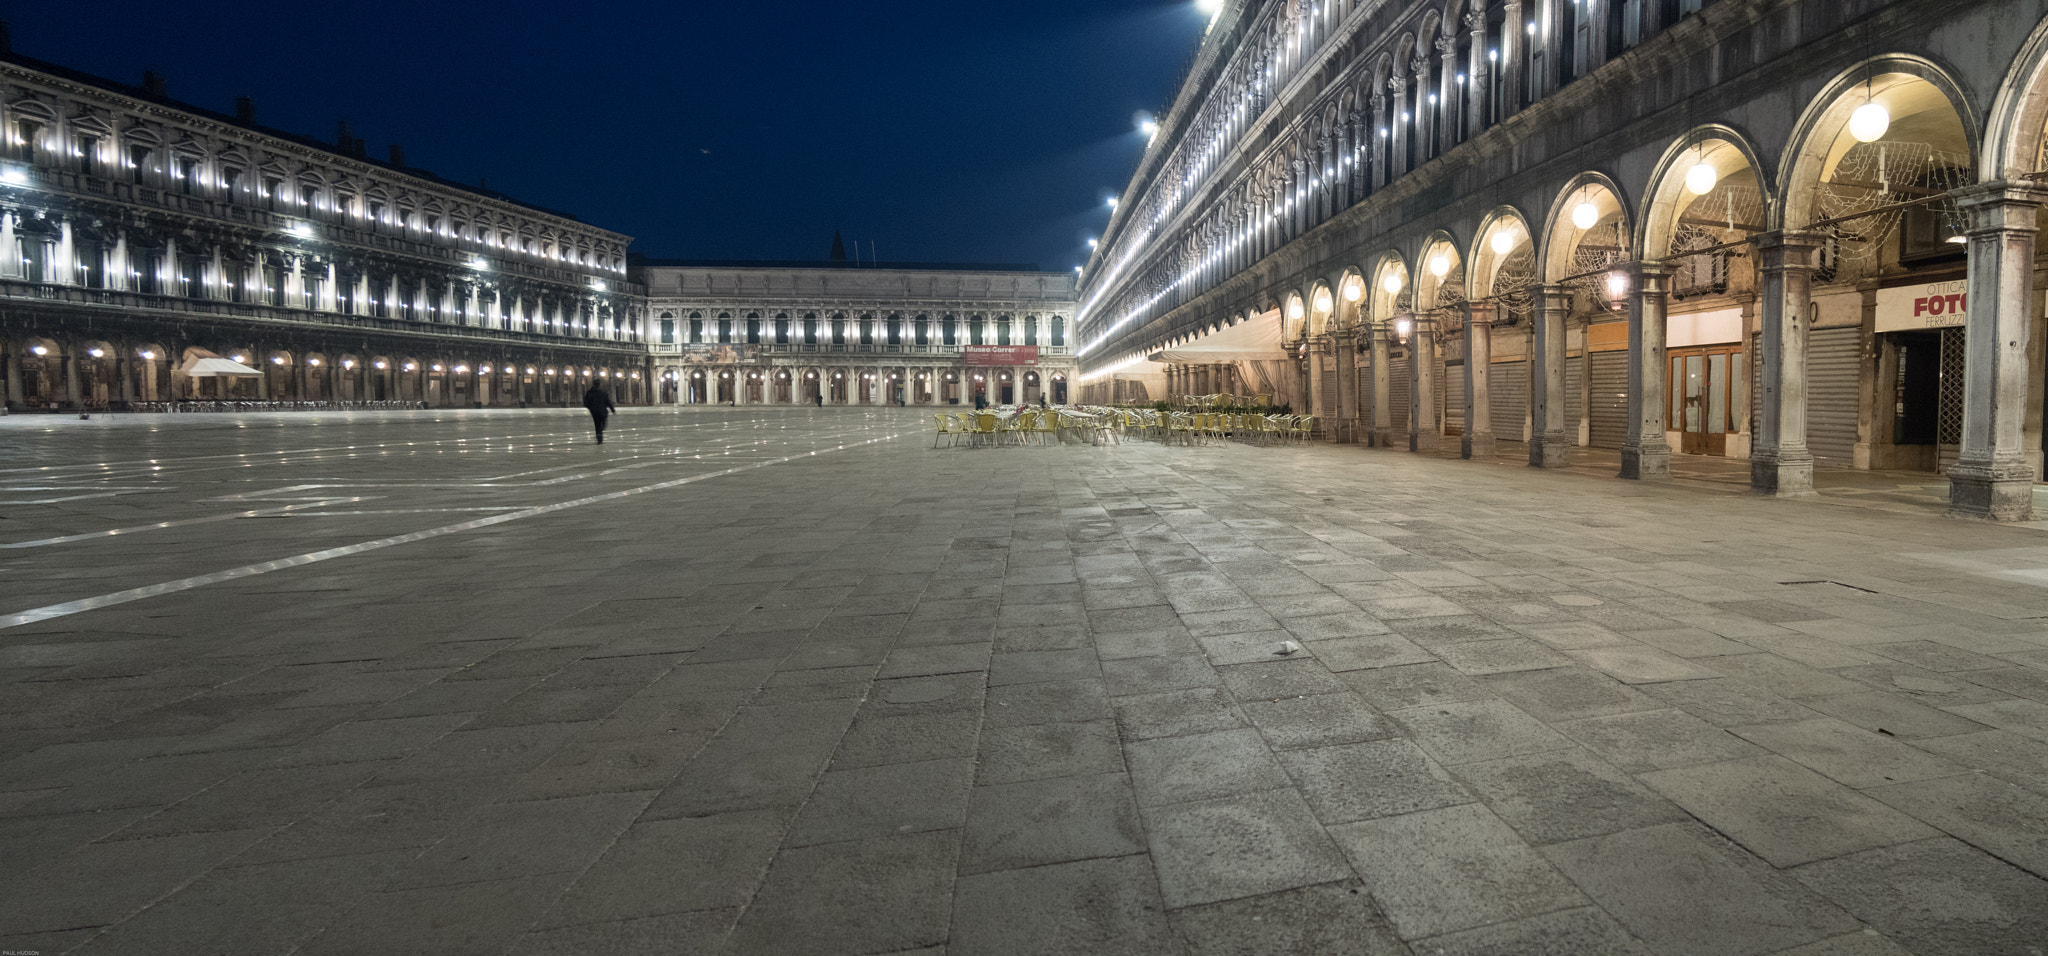 Olympus PEN E-PL7 sample photo. Piazza san marco at dawn photography